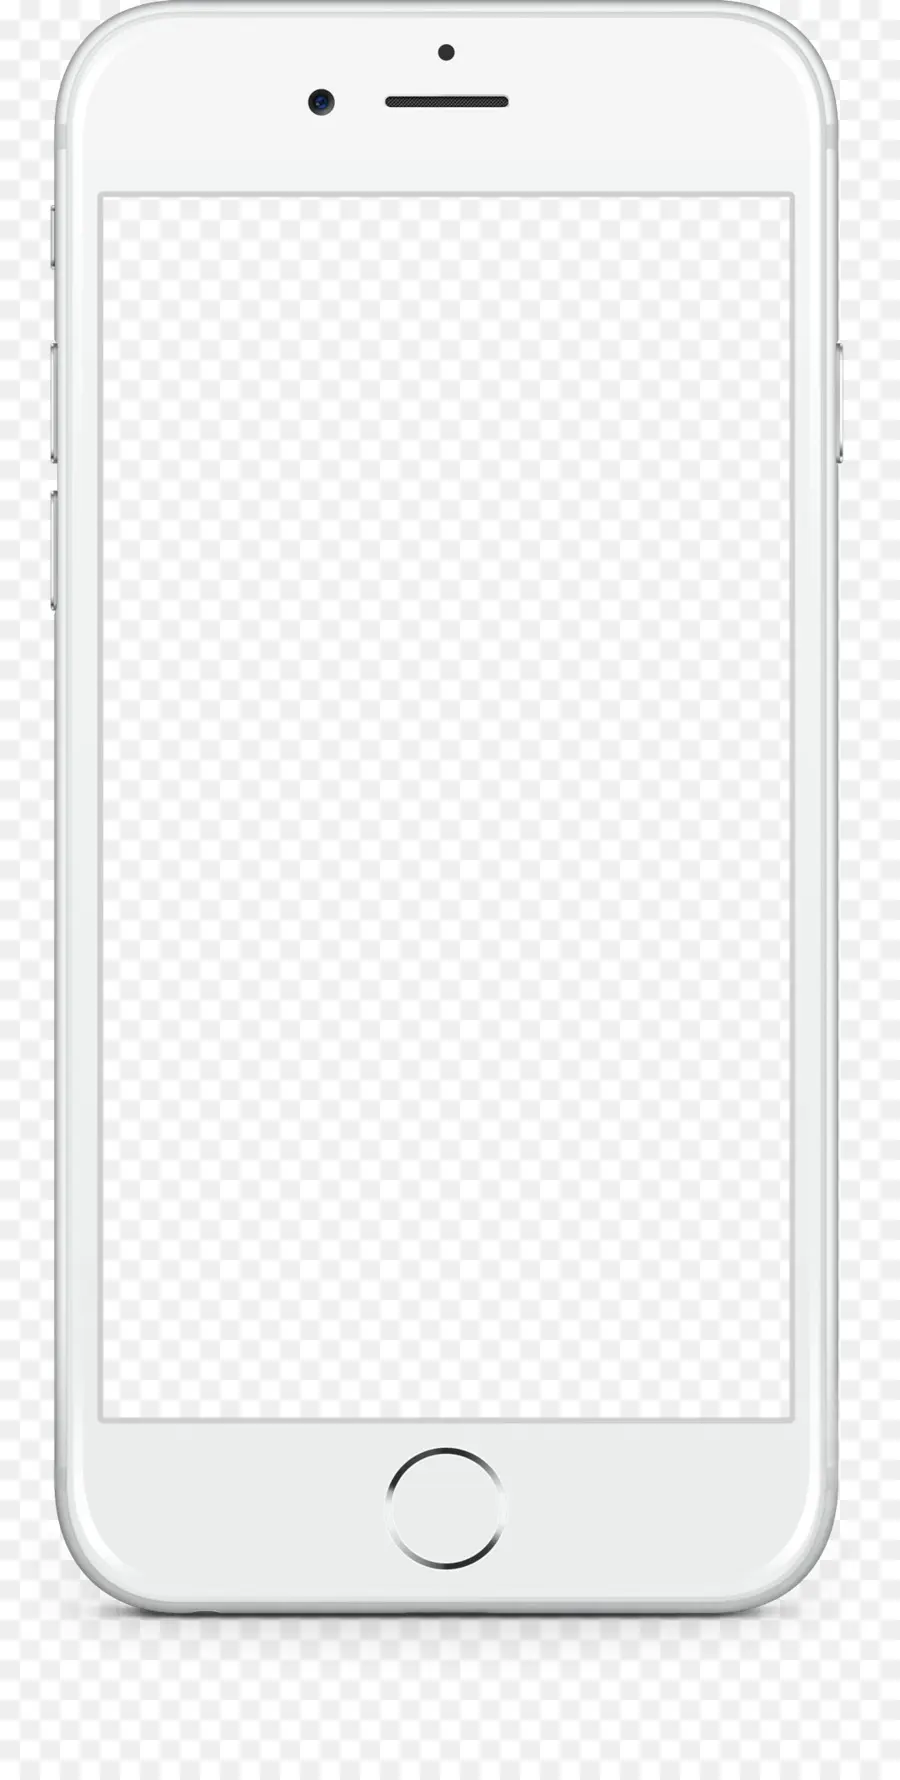 Iphone 6，Smartphone PNG